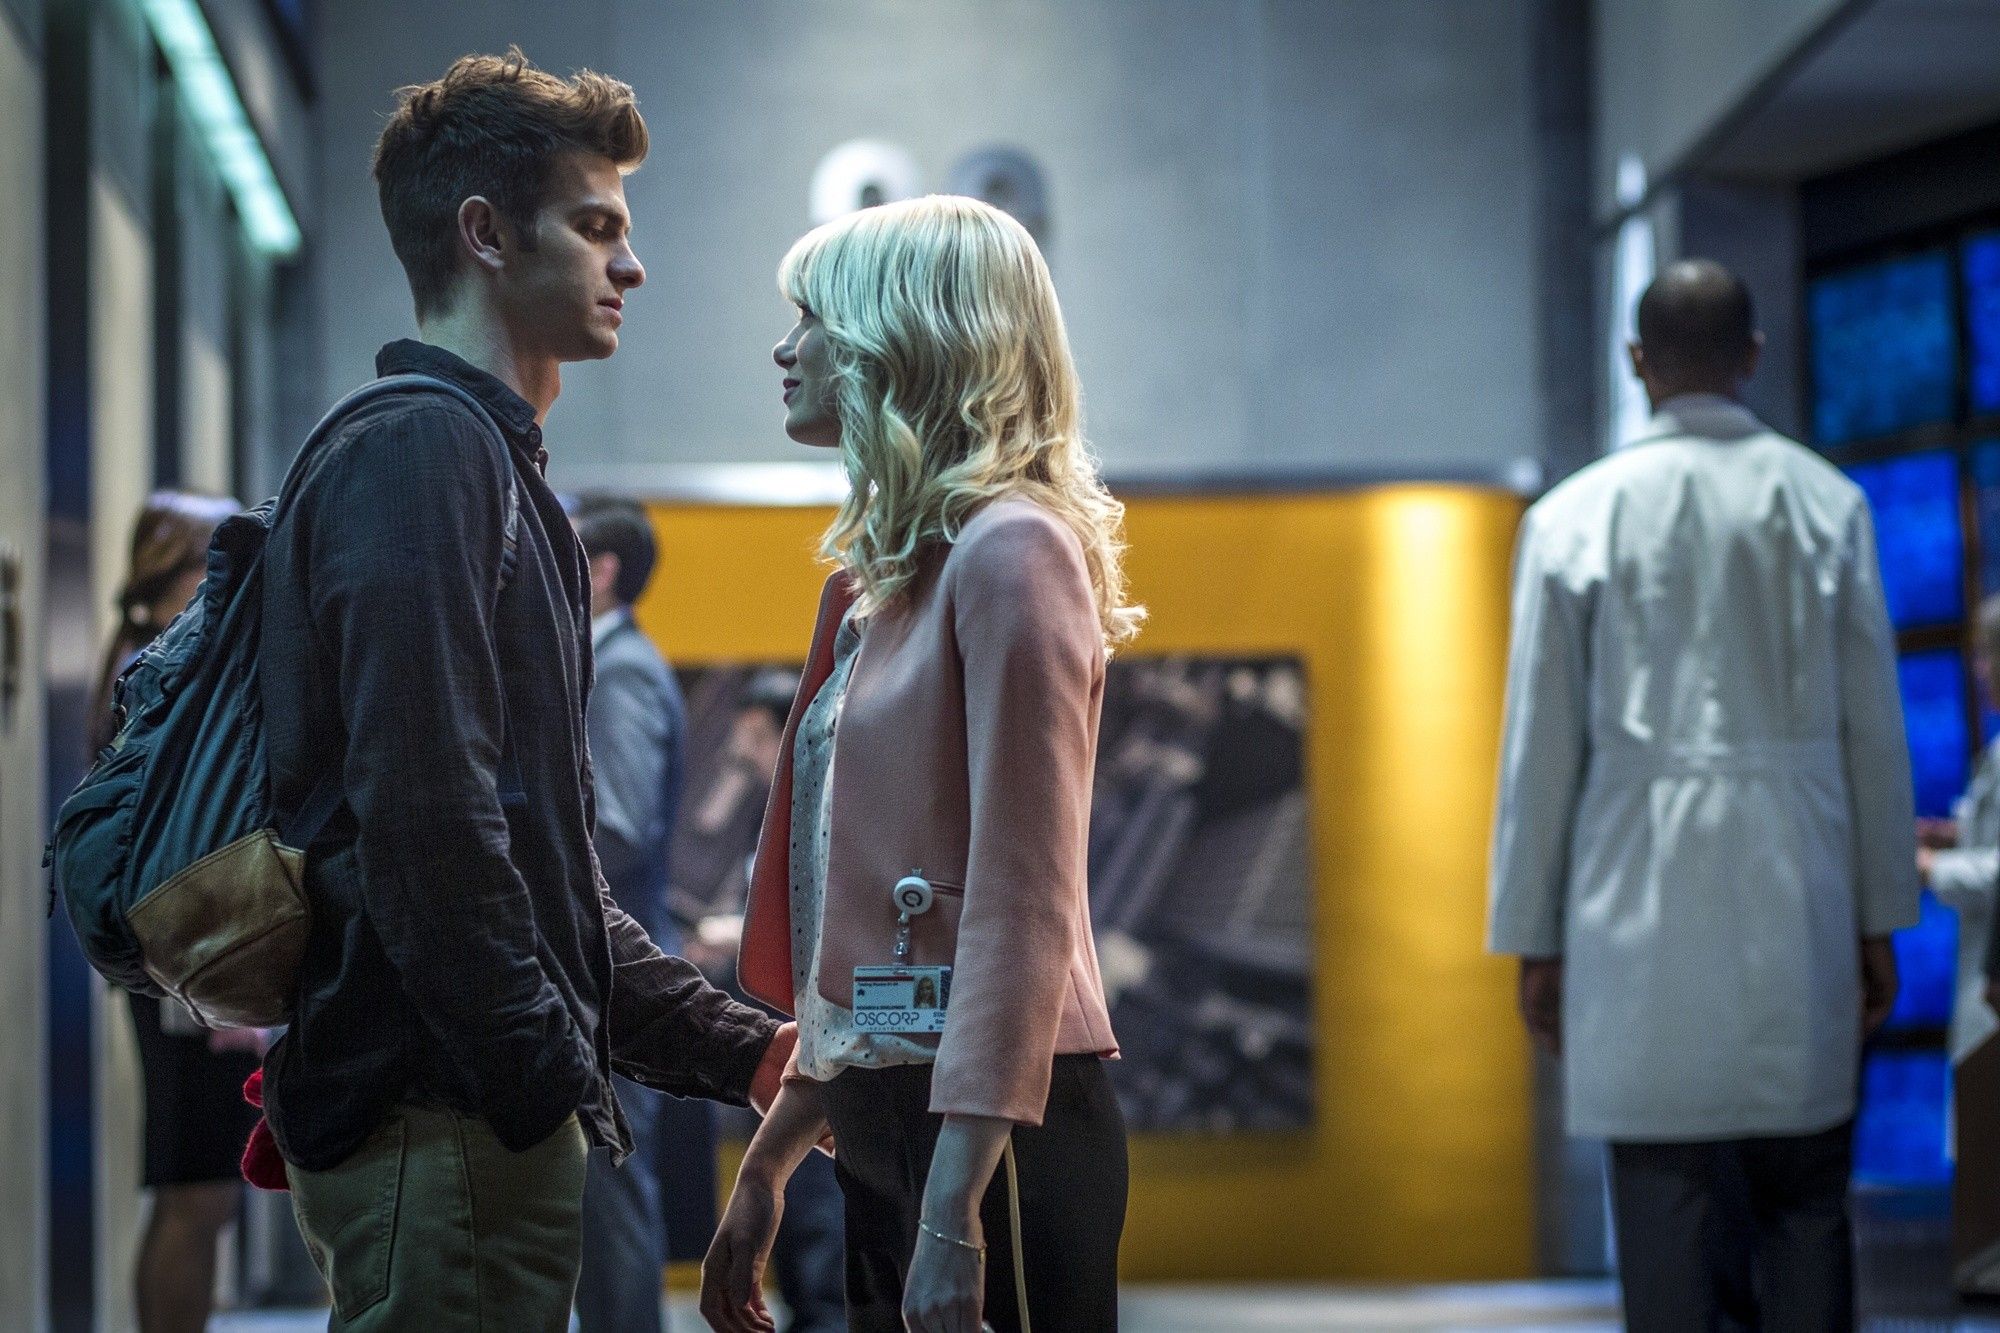 Andrew Garfield stars as Peter Parker/Spider-Man and Emma Stone stars as Gwen Stacy in Columbia Pictures' The Amazing Spider-Man 2 (2014)